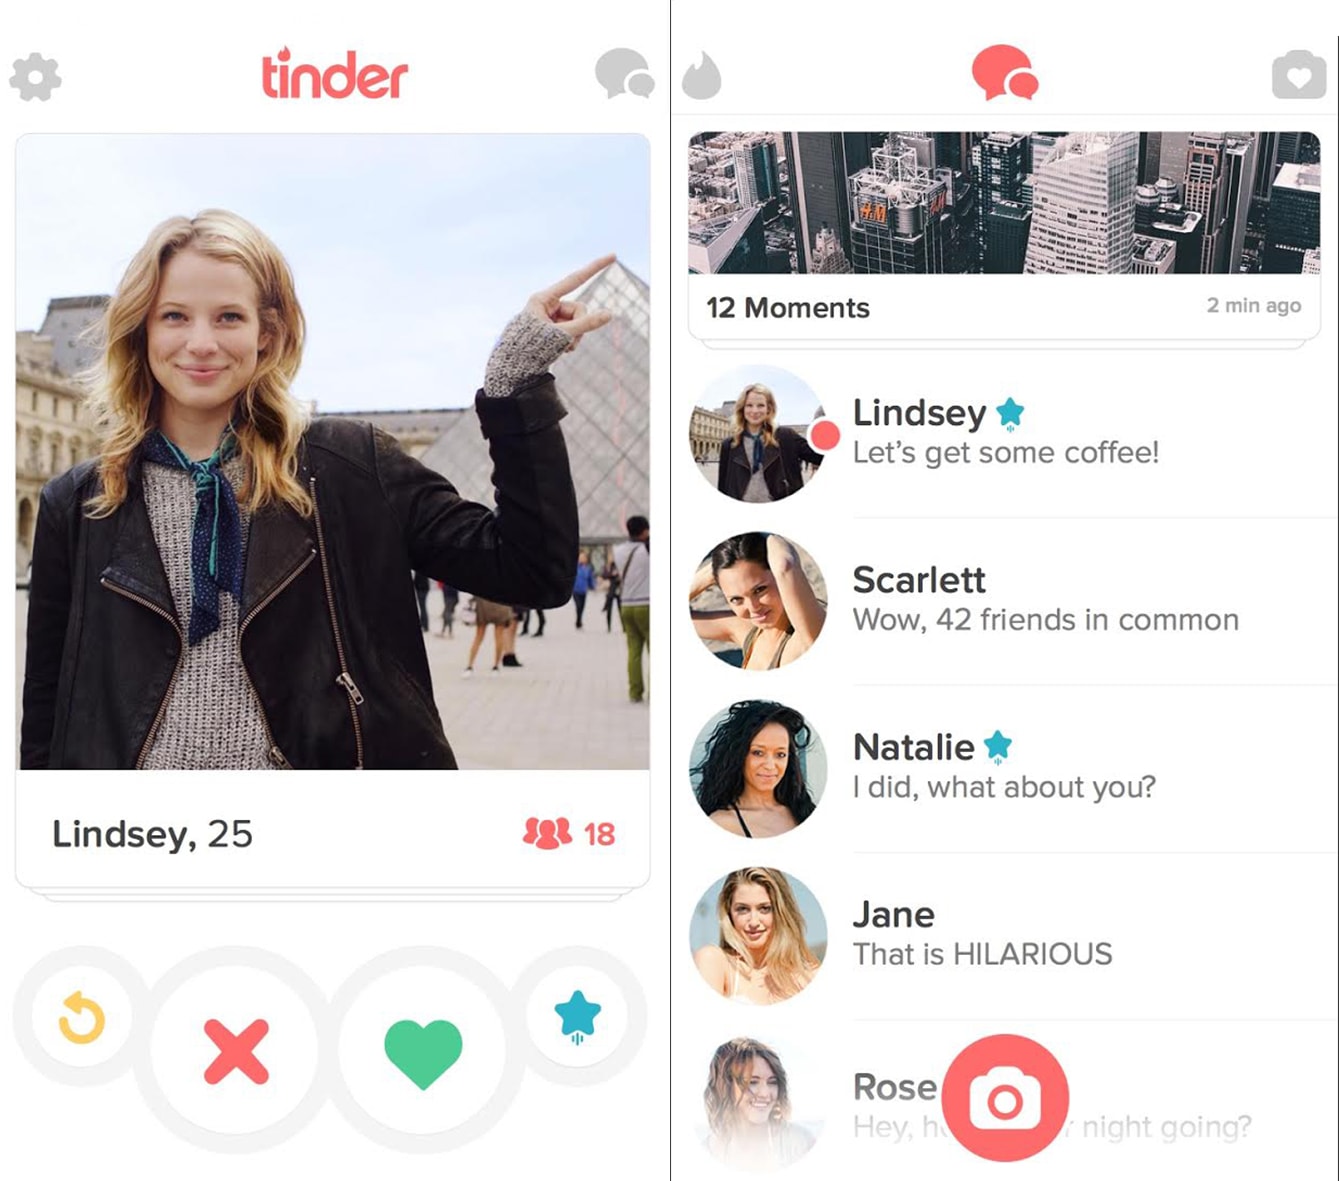 Tinder founder Sean Rad's top tips for the perfect profile